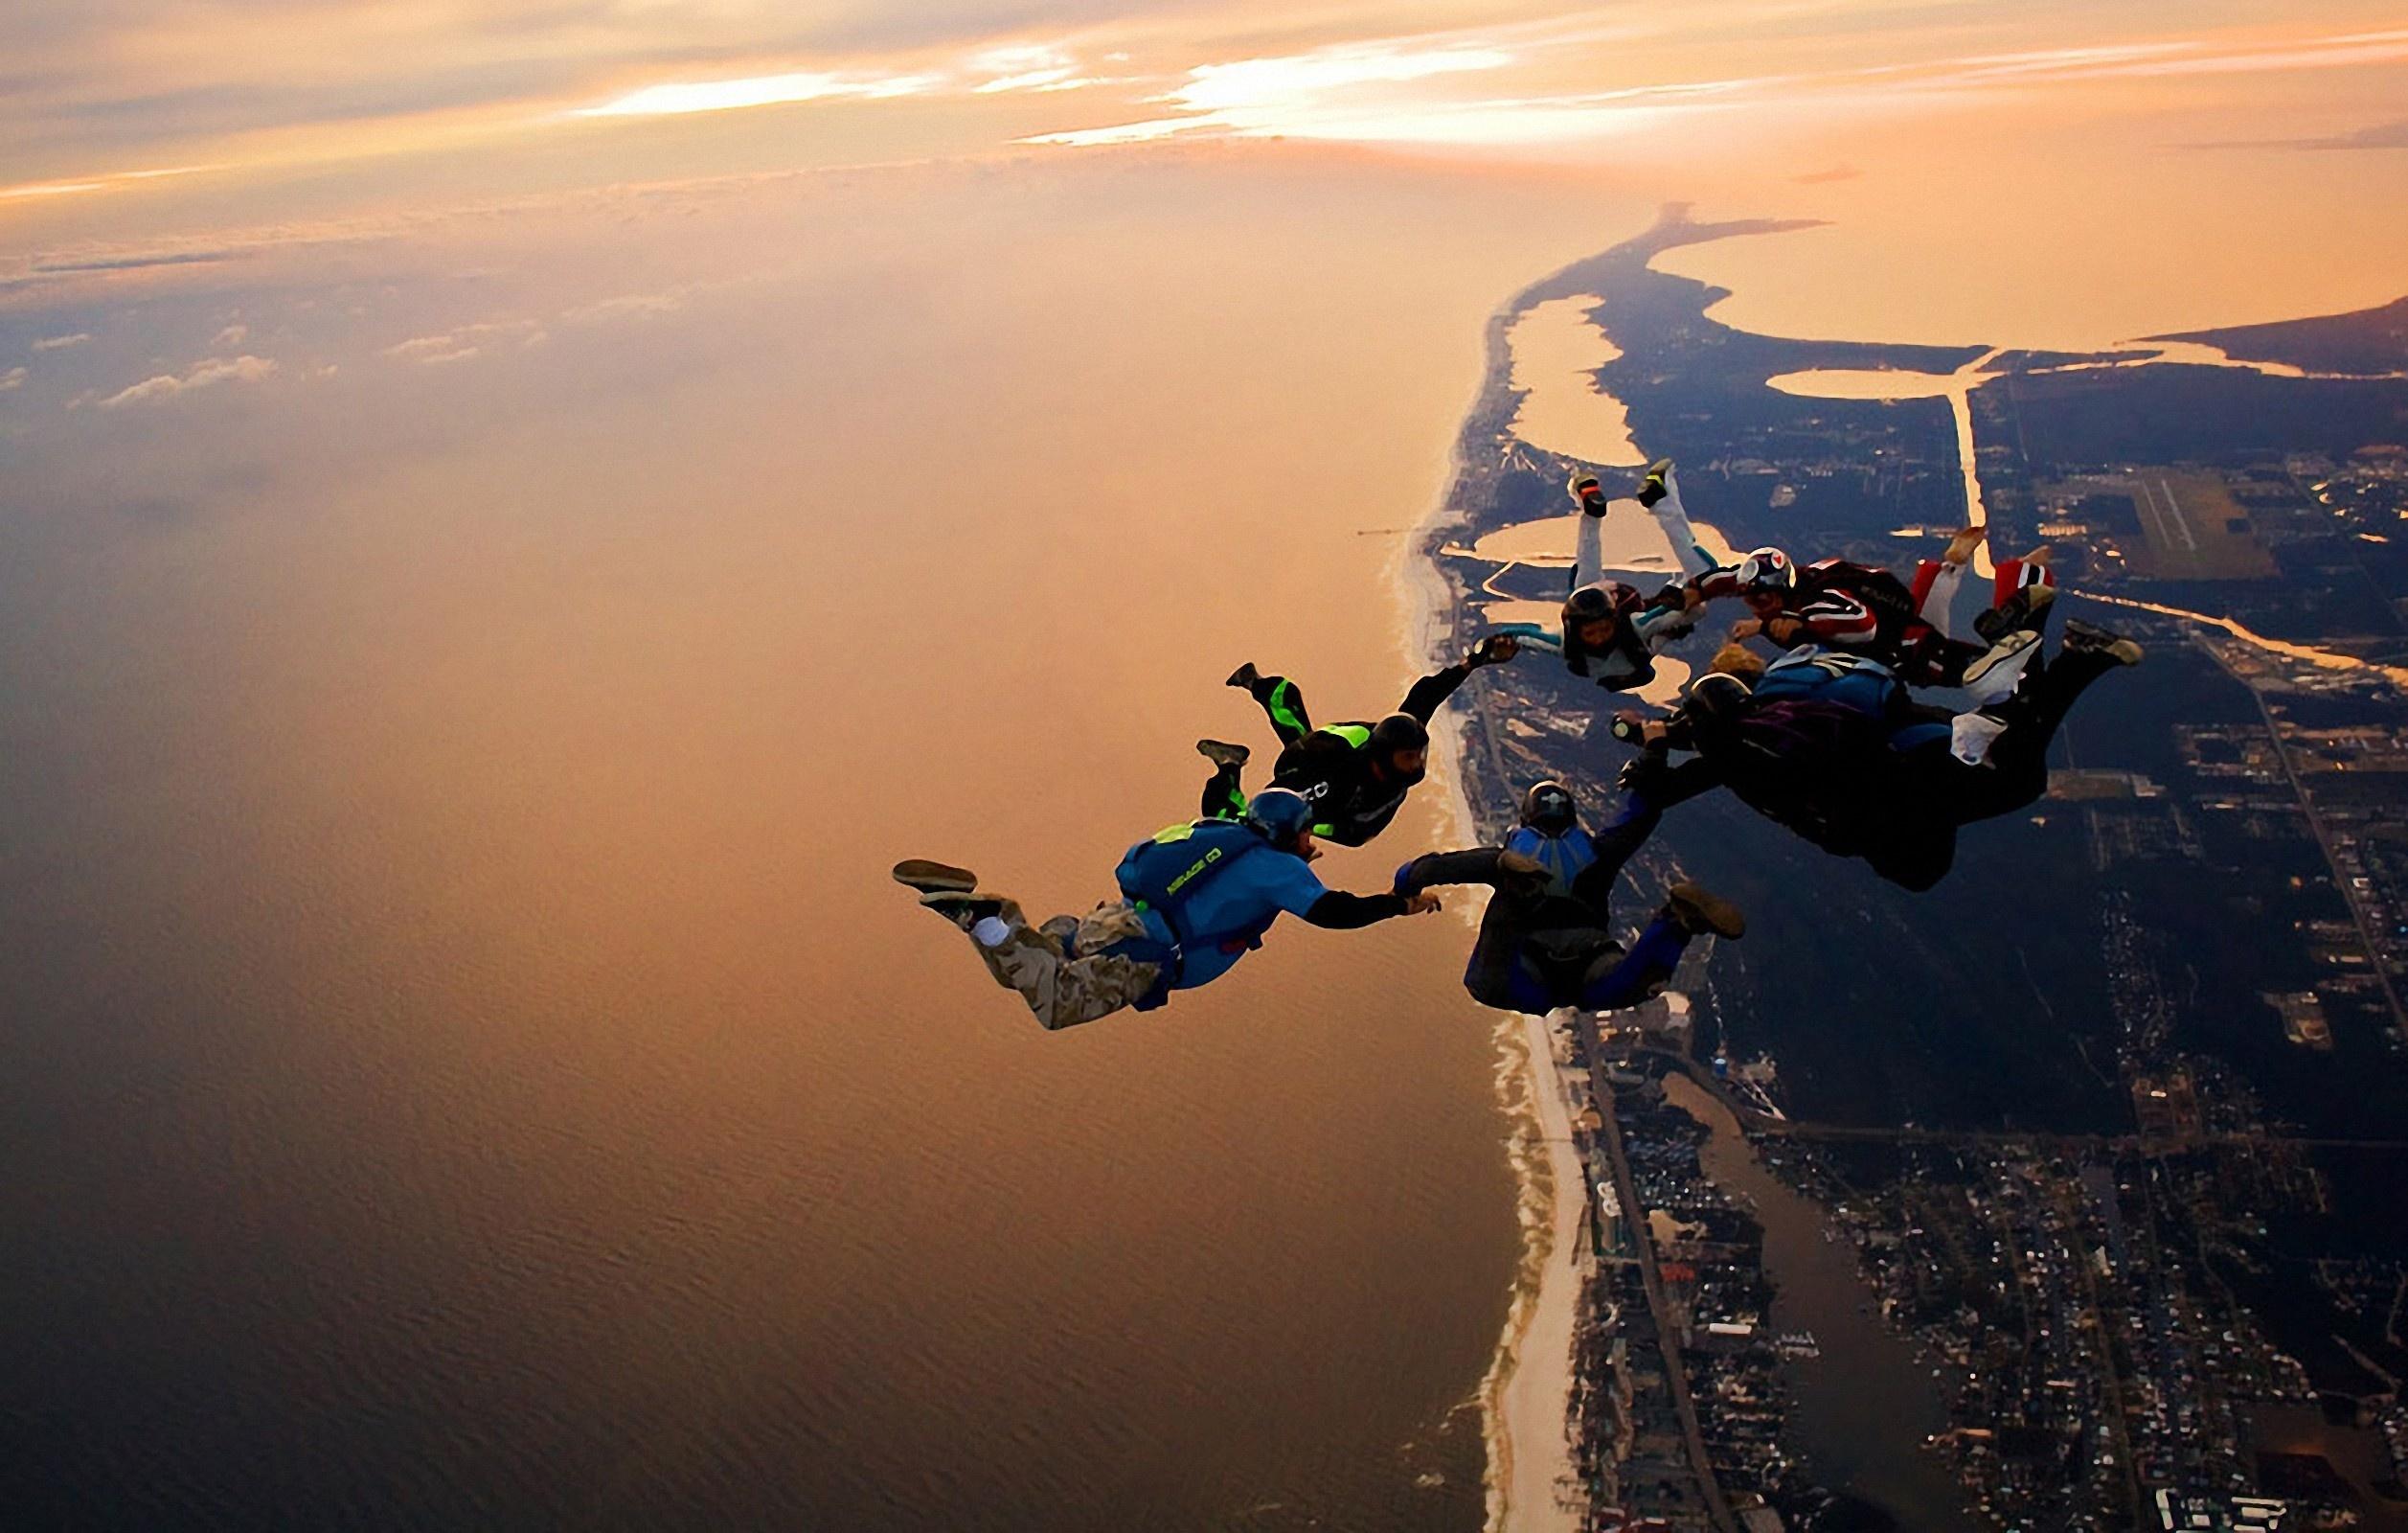 Jumpers jump fly sky sea land view cool parachute skydiving